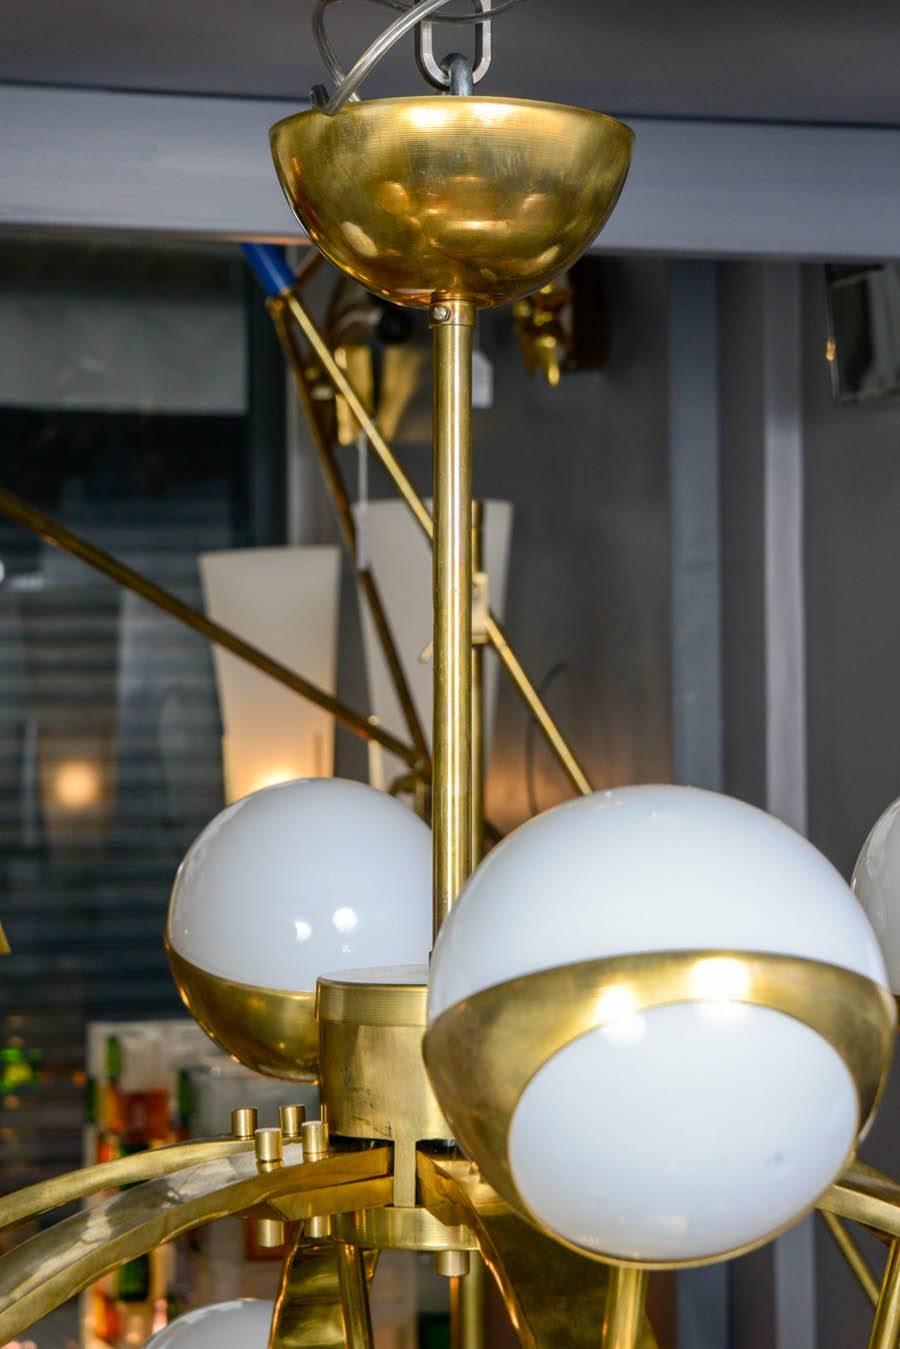 Original brass circular chandelier made of six arcs each supporting four lights set in white glass globes.